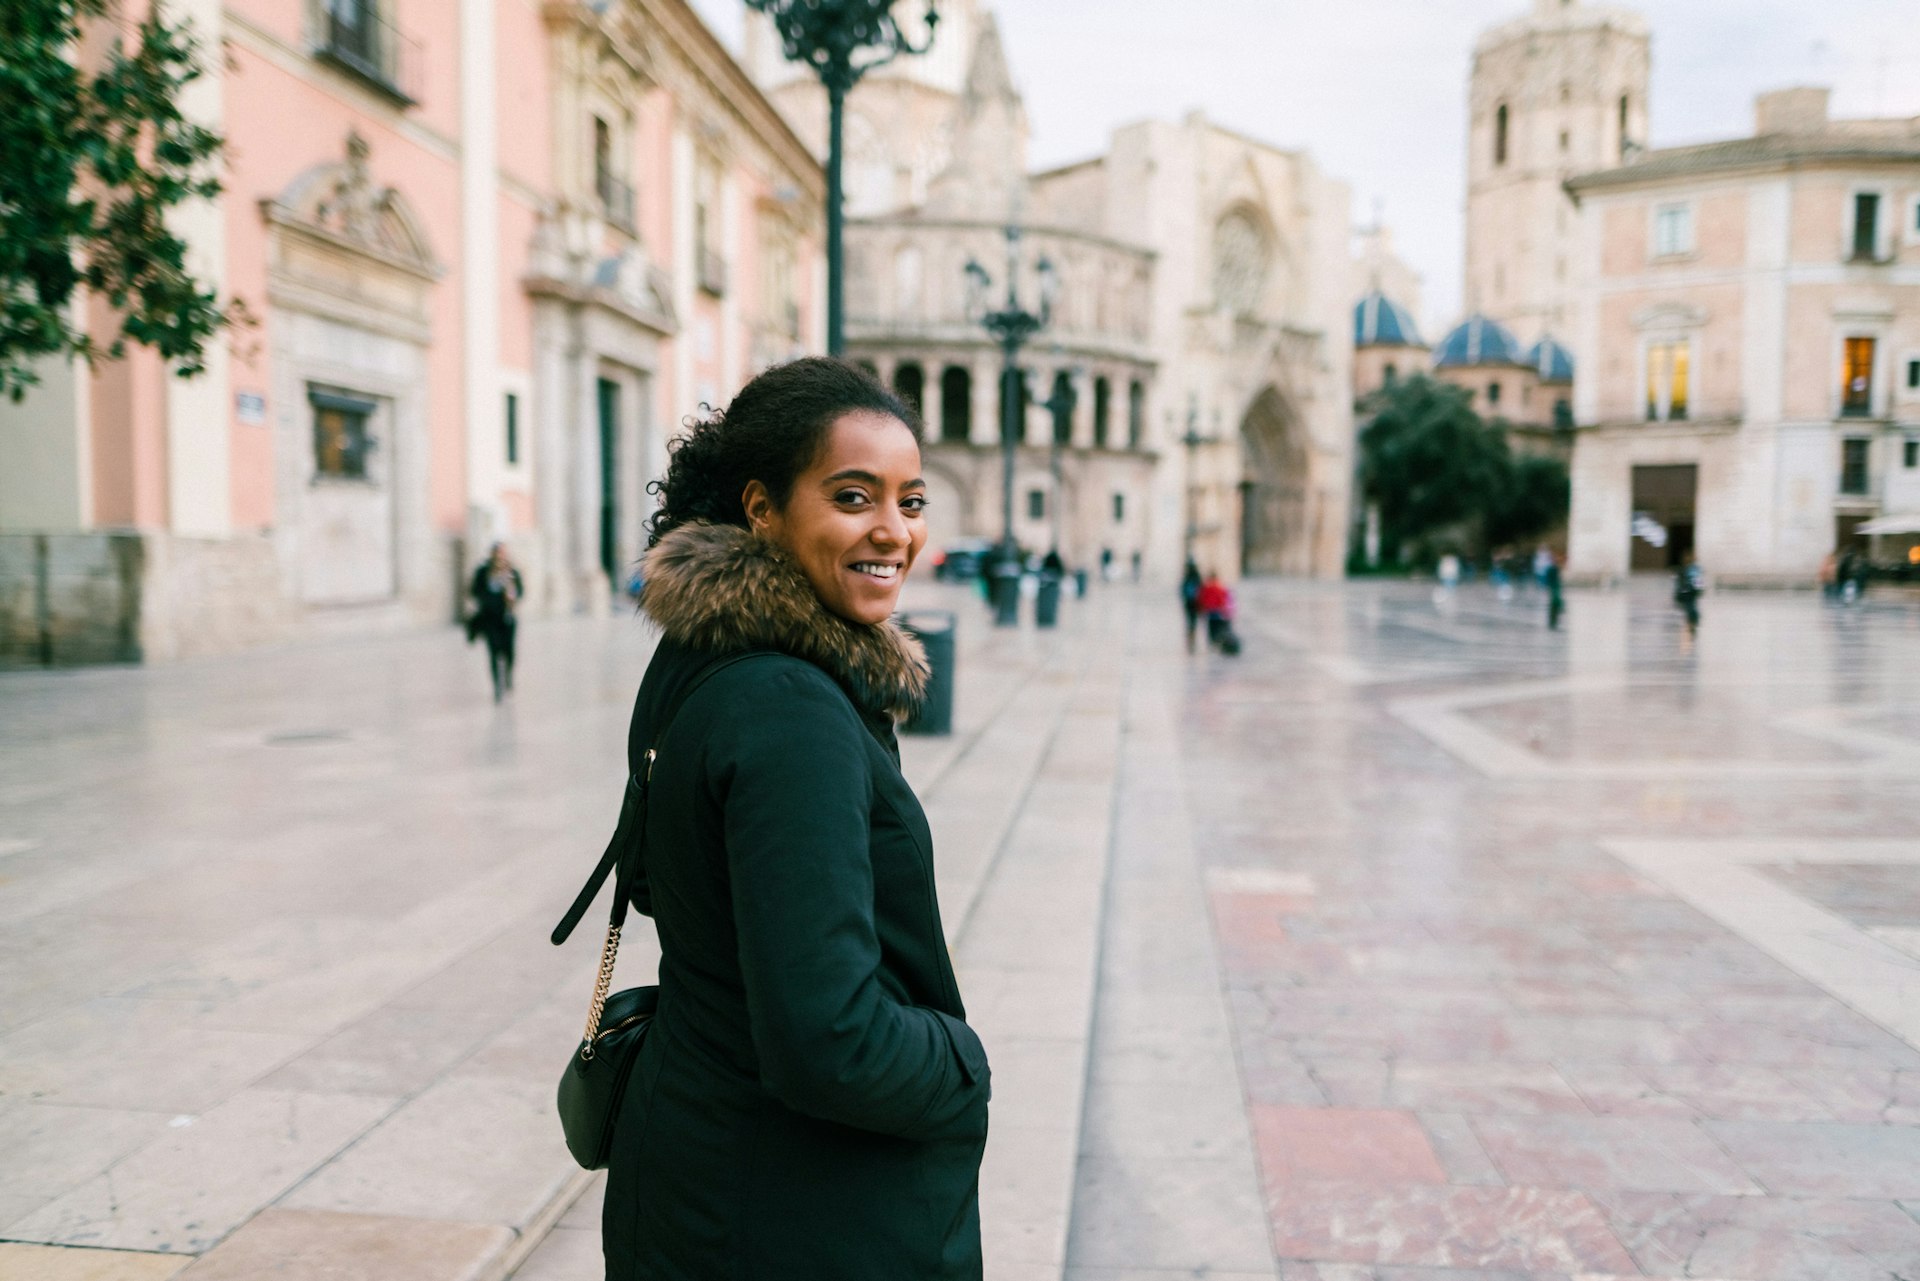 A tourist walking across the Plaza de la Virgen in Valencia turns and faces the camera and smiles